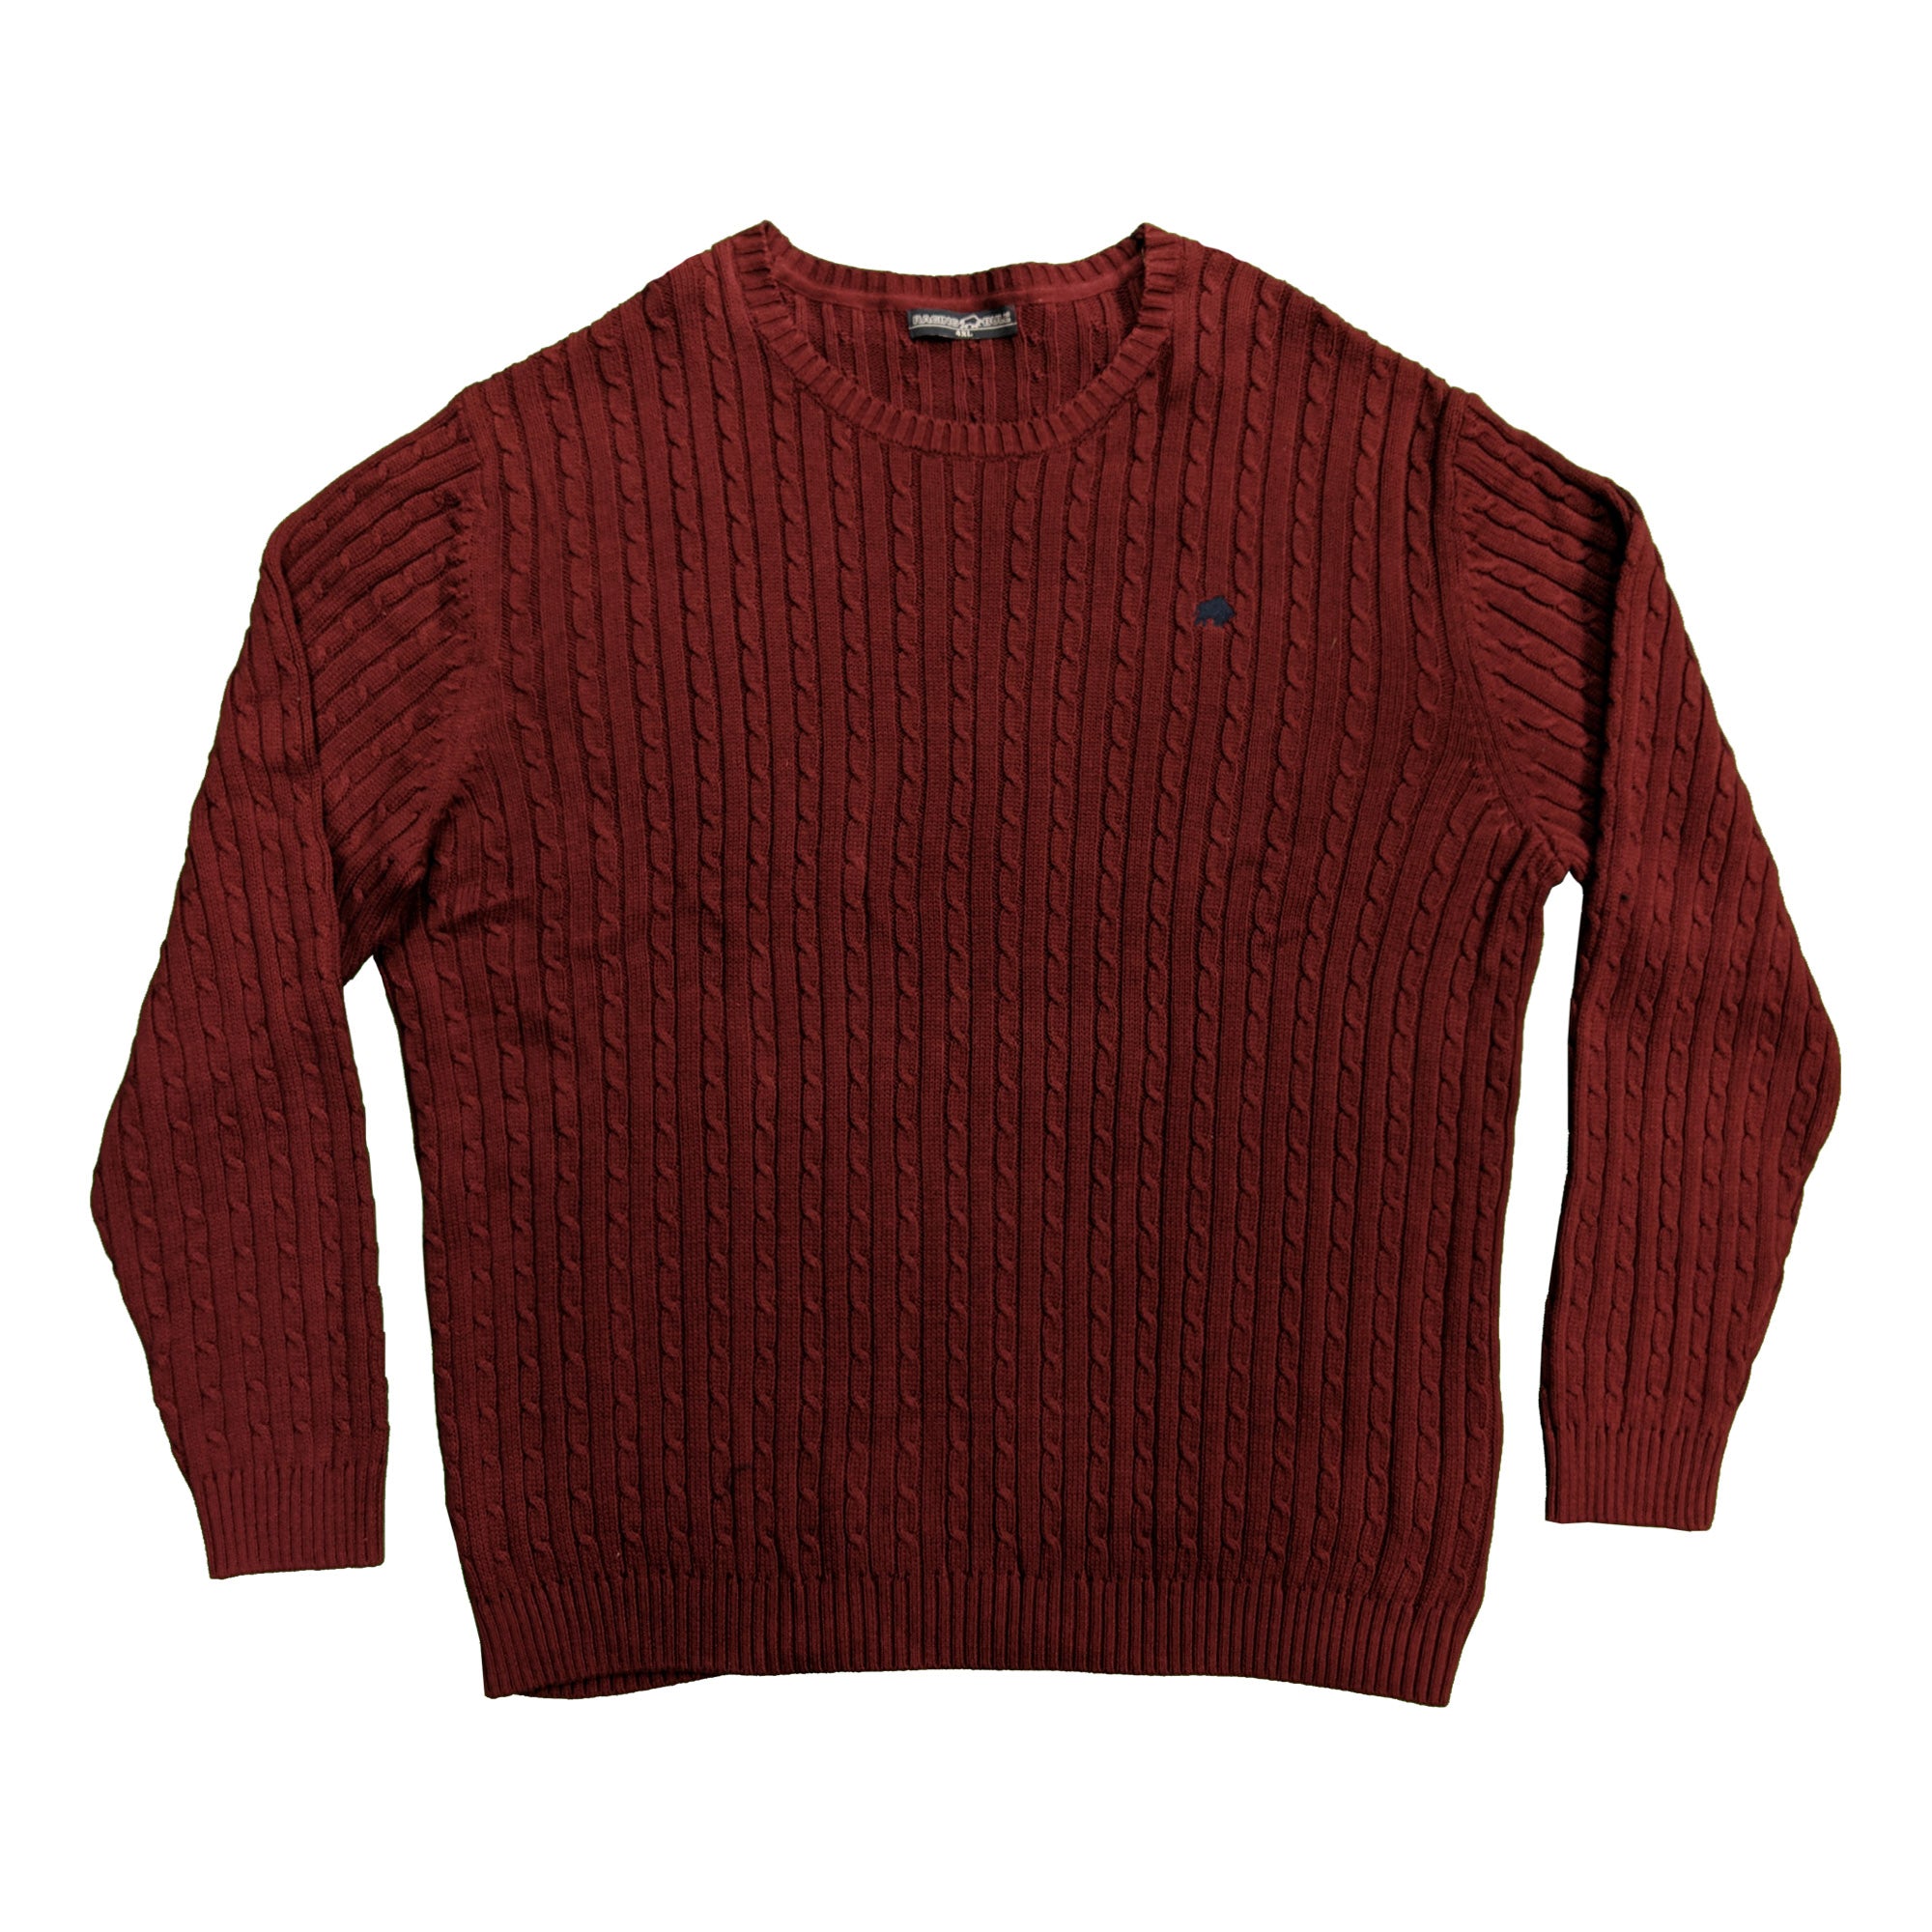 Raging Bull Cable Knit Sweater - A1345 - Claret 1